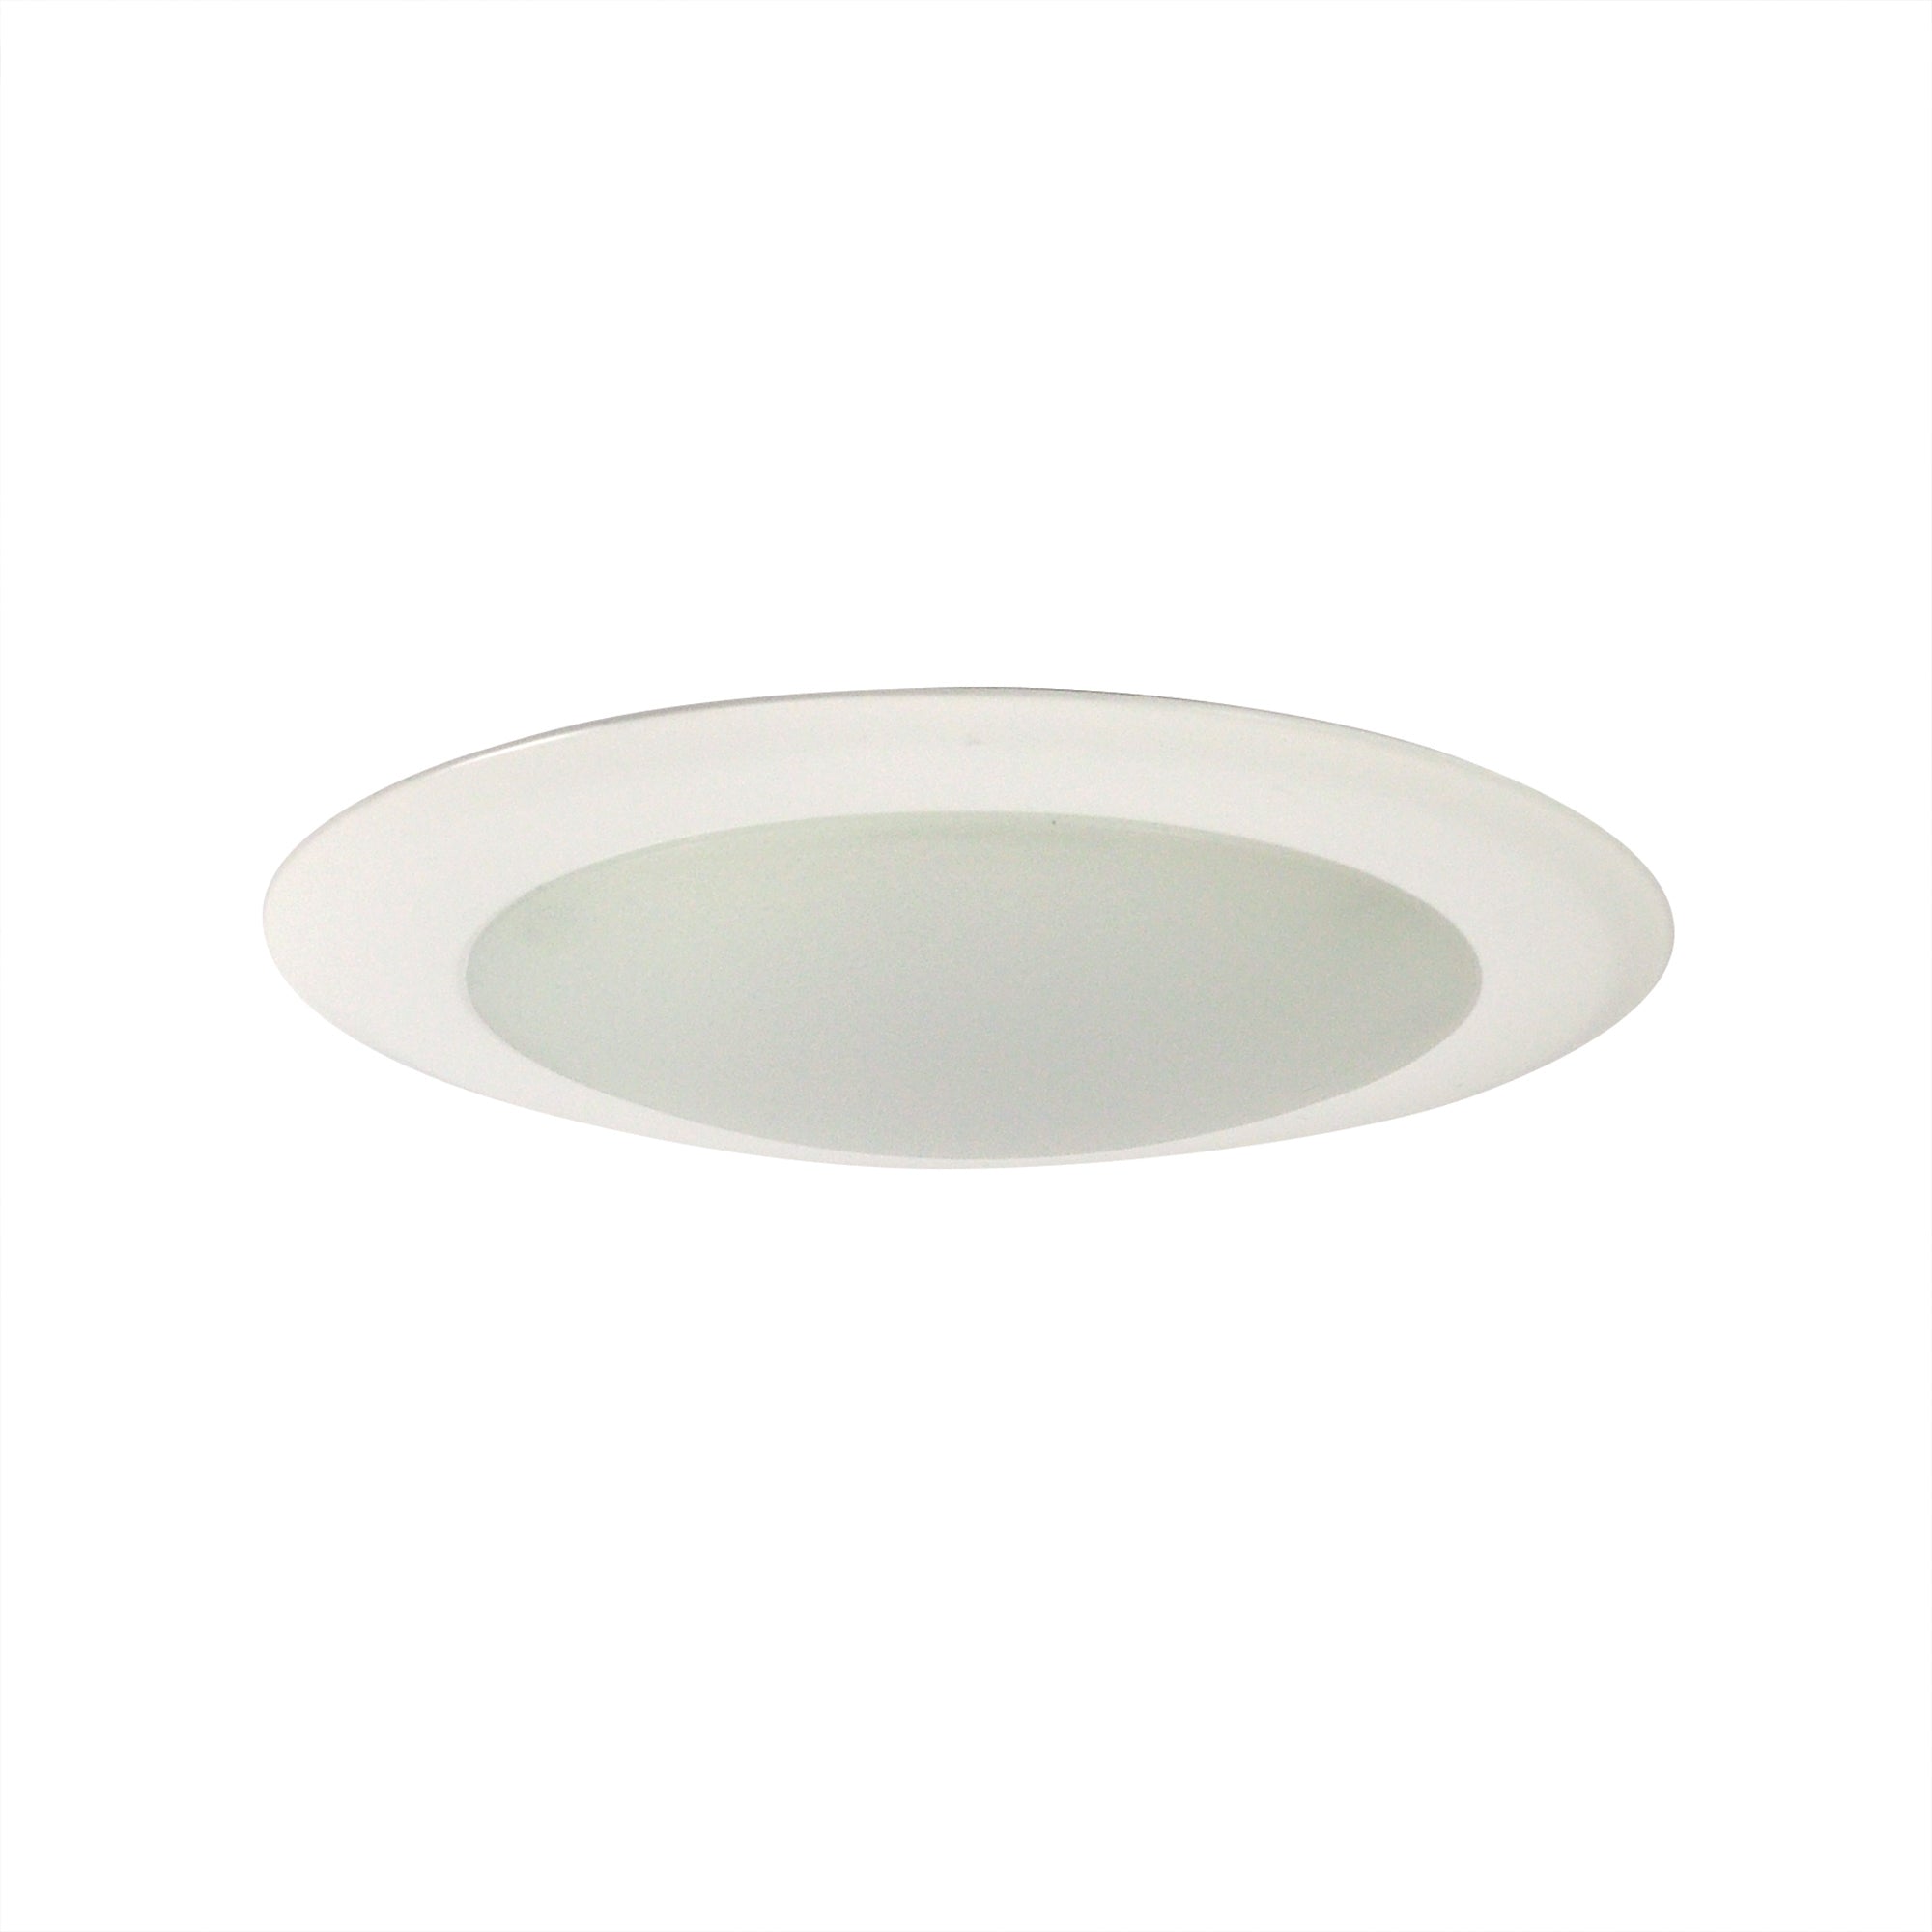 Nora Lighting NLOPAC-R6509T2450W - Surface - 6 Inch AC Opal LED Surface Mount, 1150lm / 16.5W, 5000K, White finish